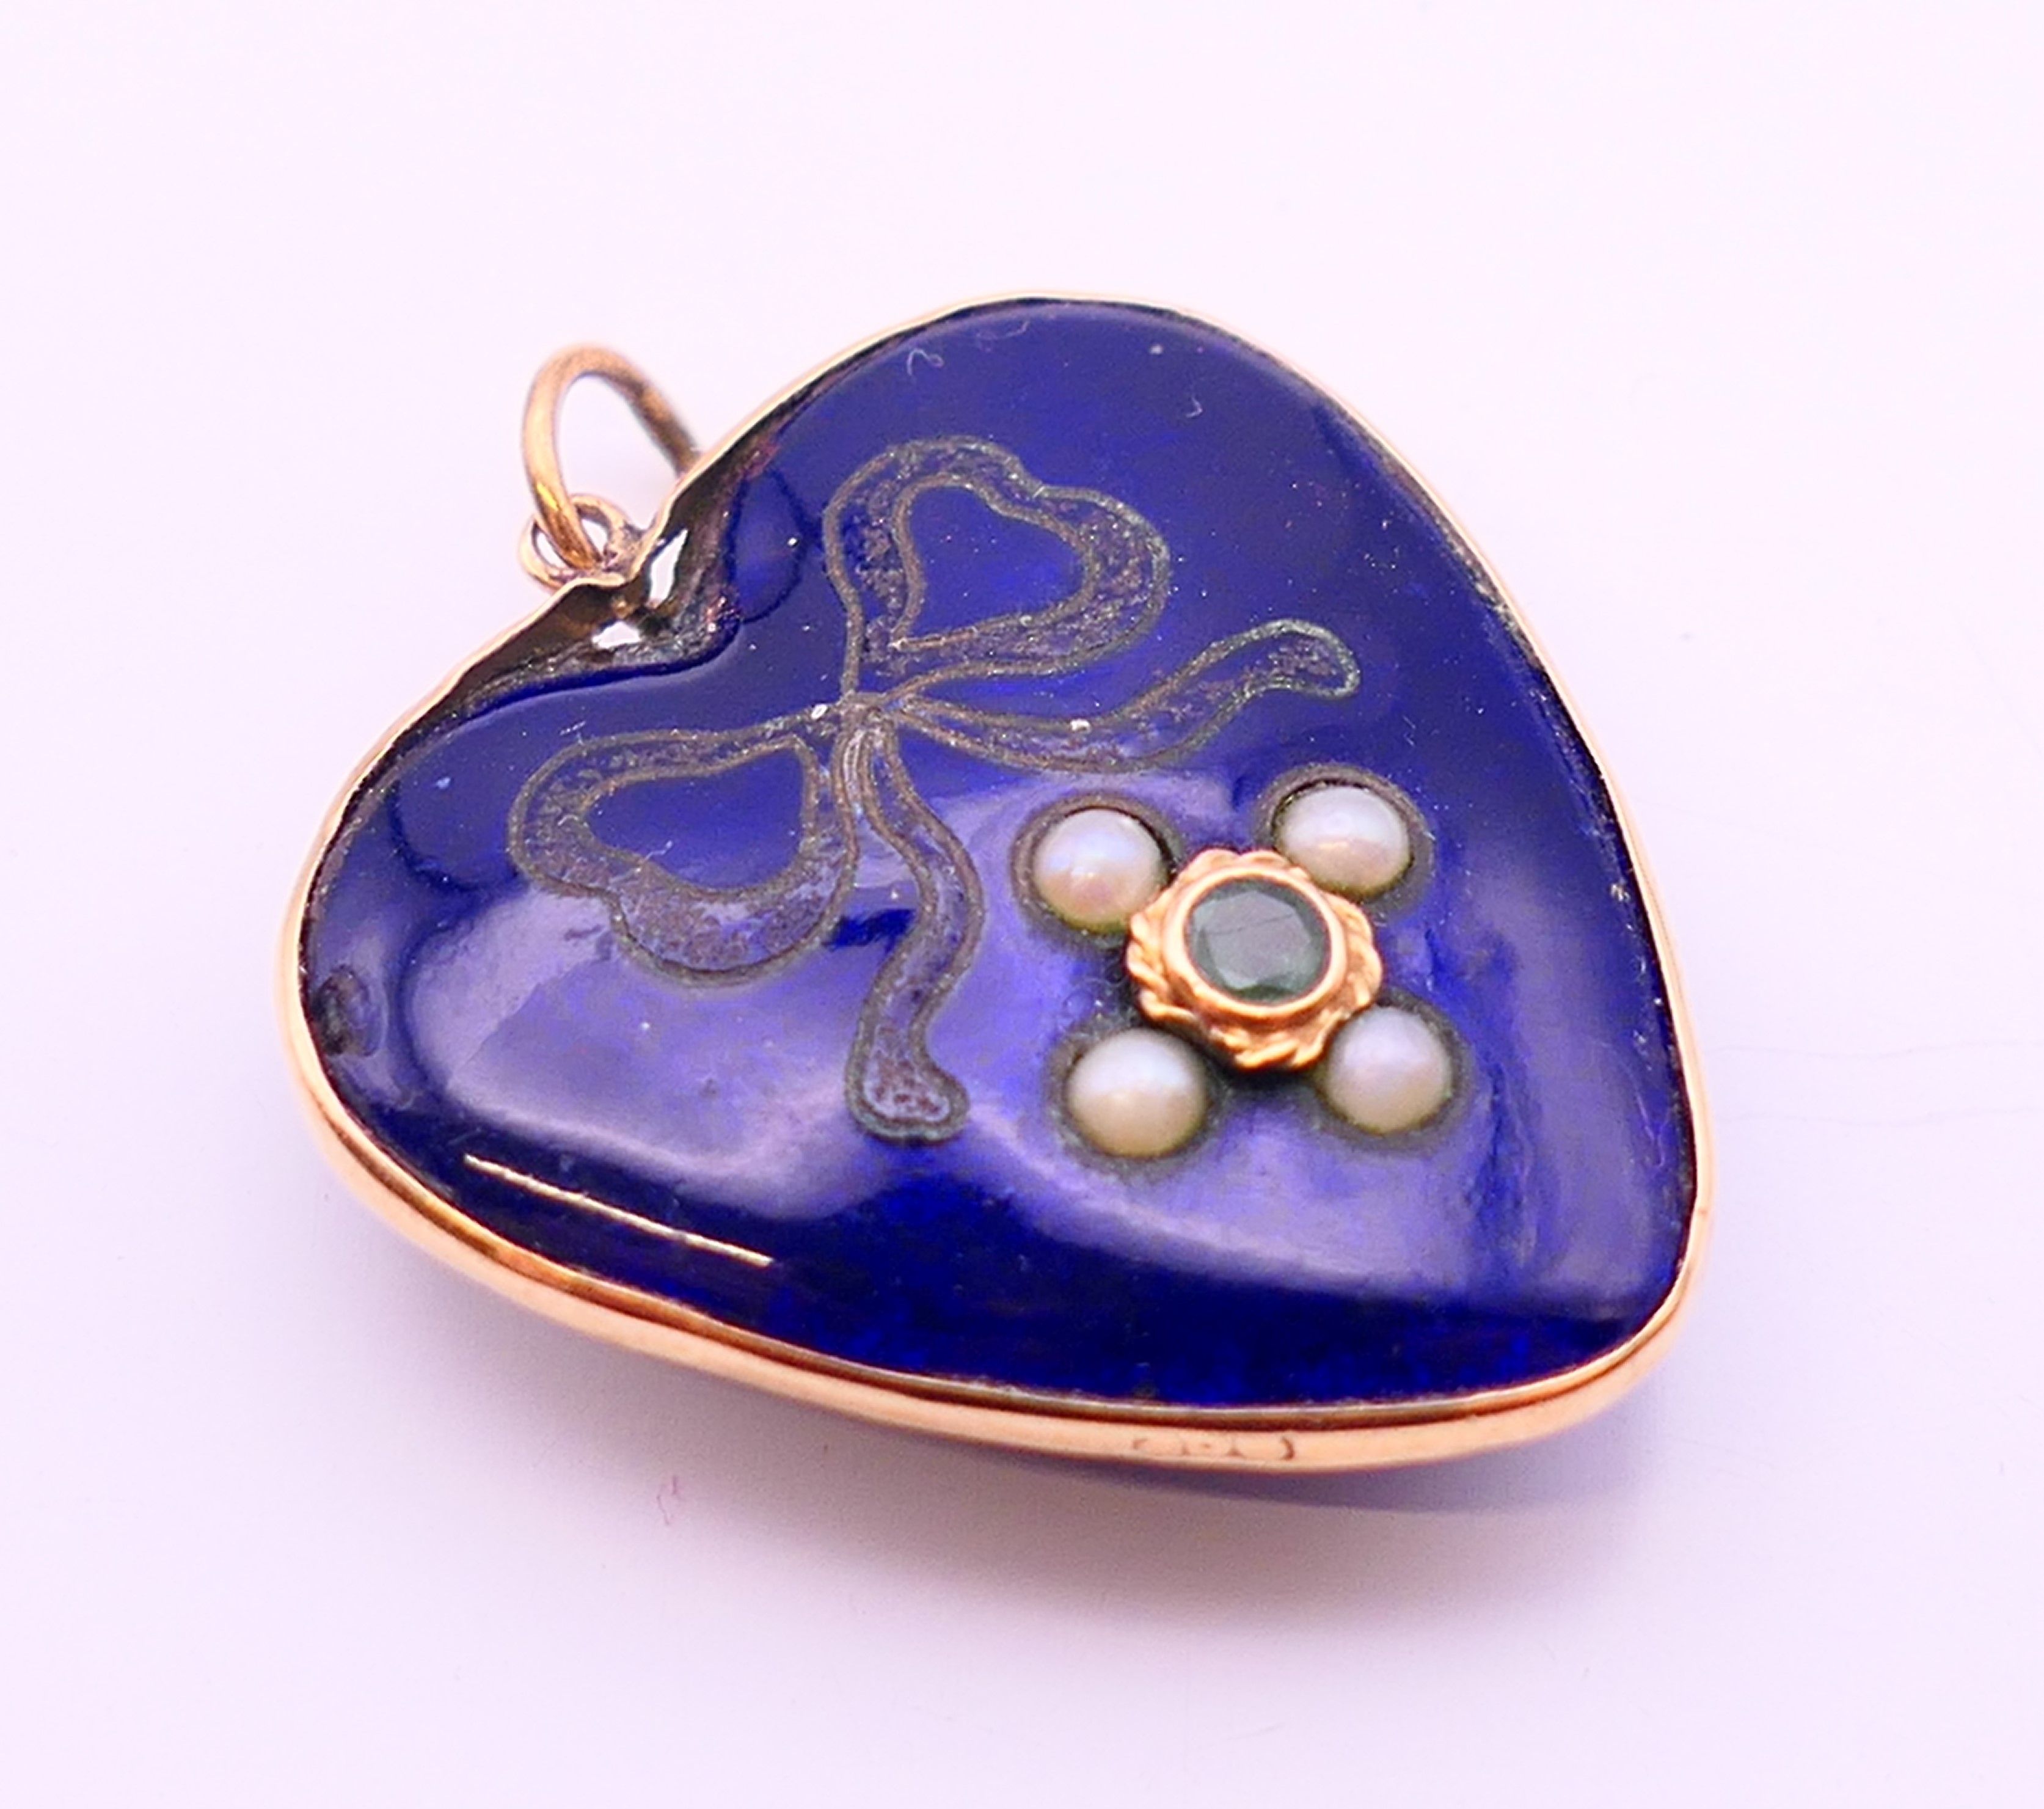 An enamel heart shaped pendant locket set with seed pearls and an emerald. 2.5 cm high. - Image 2 of 4